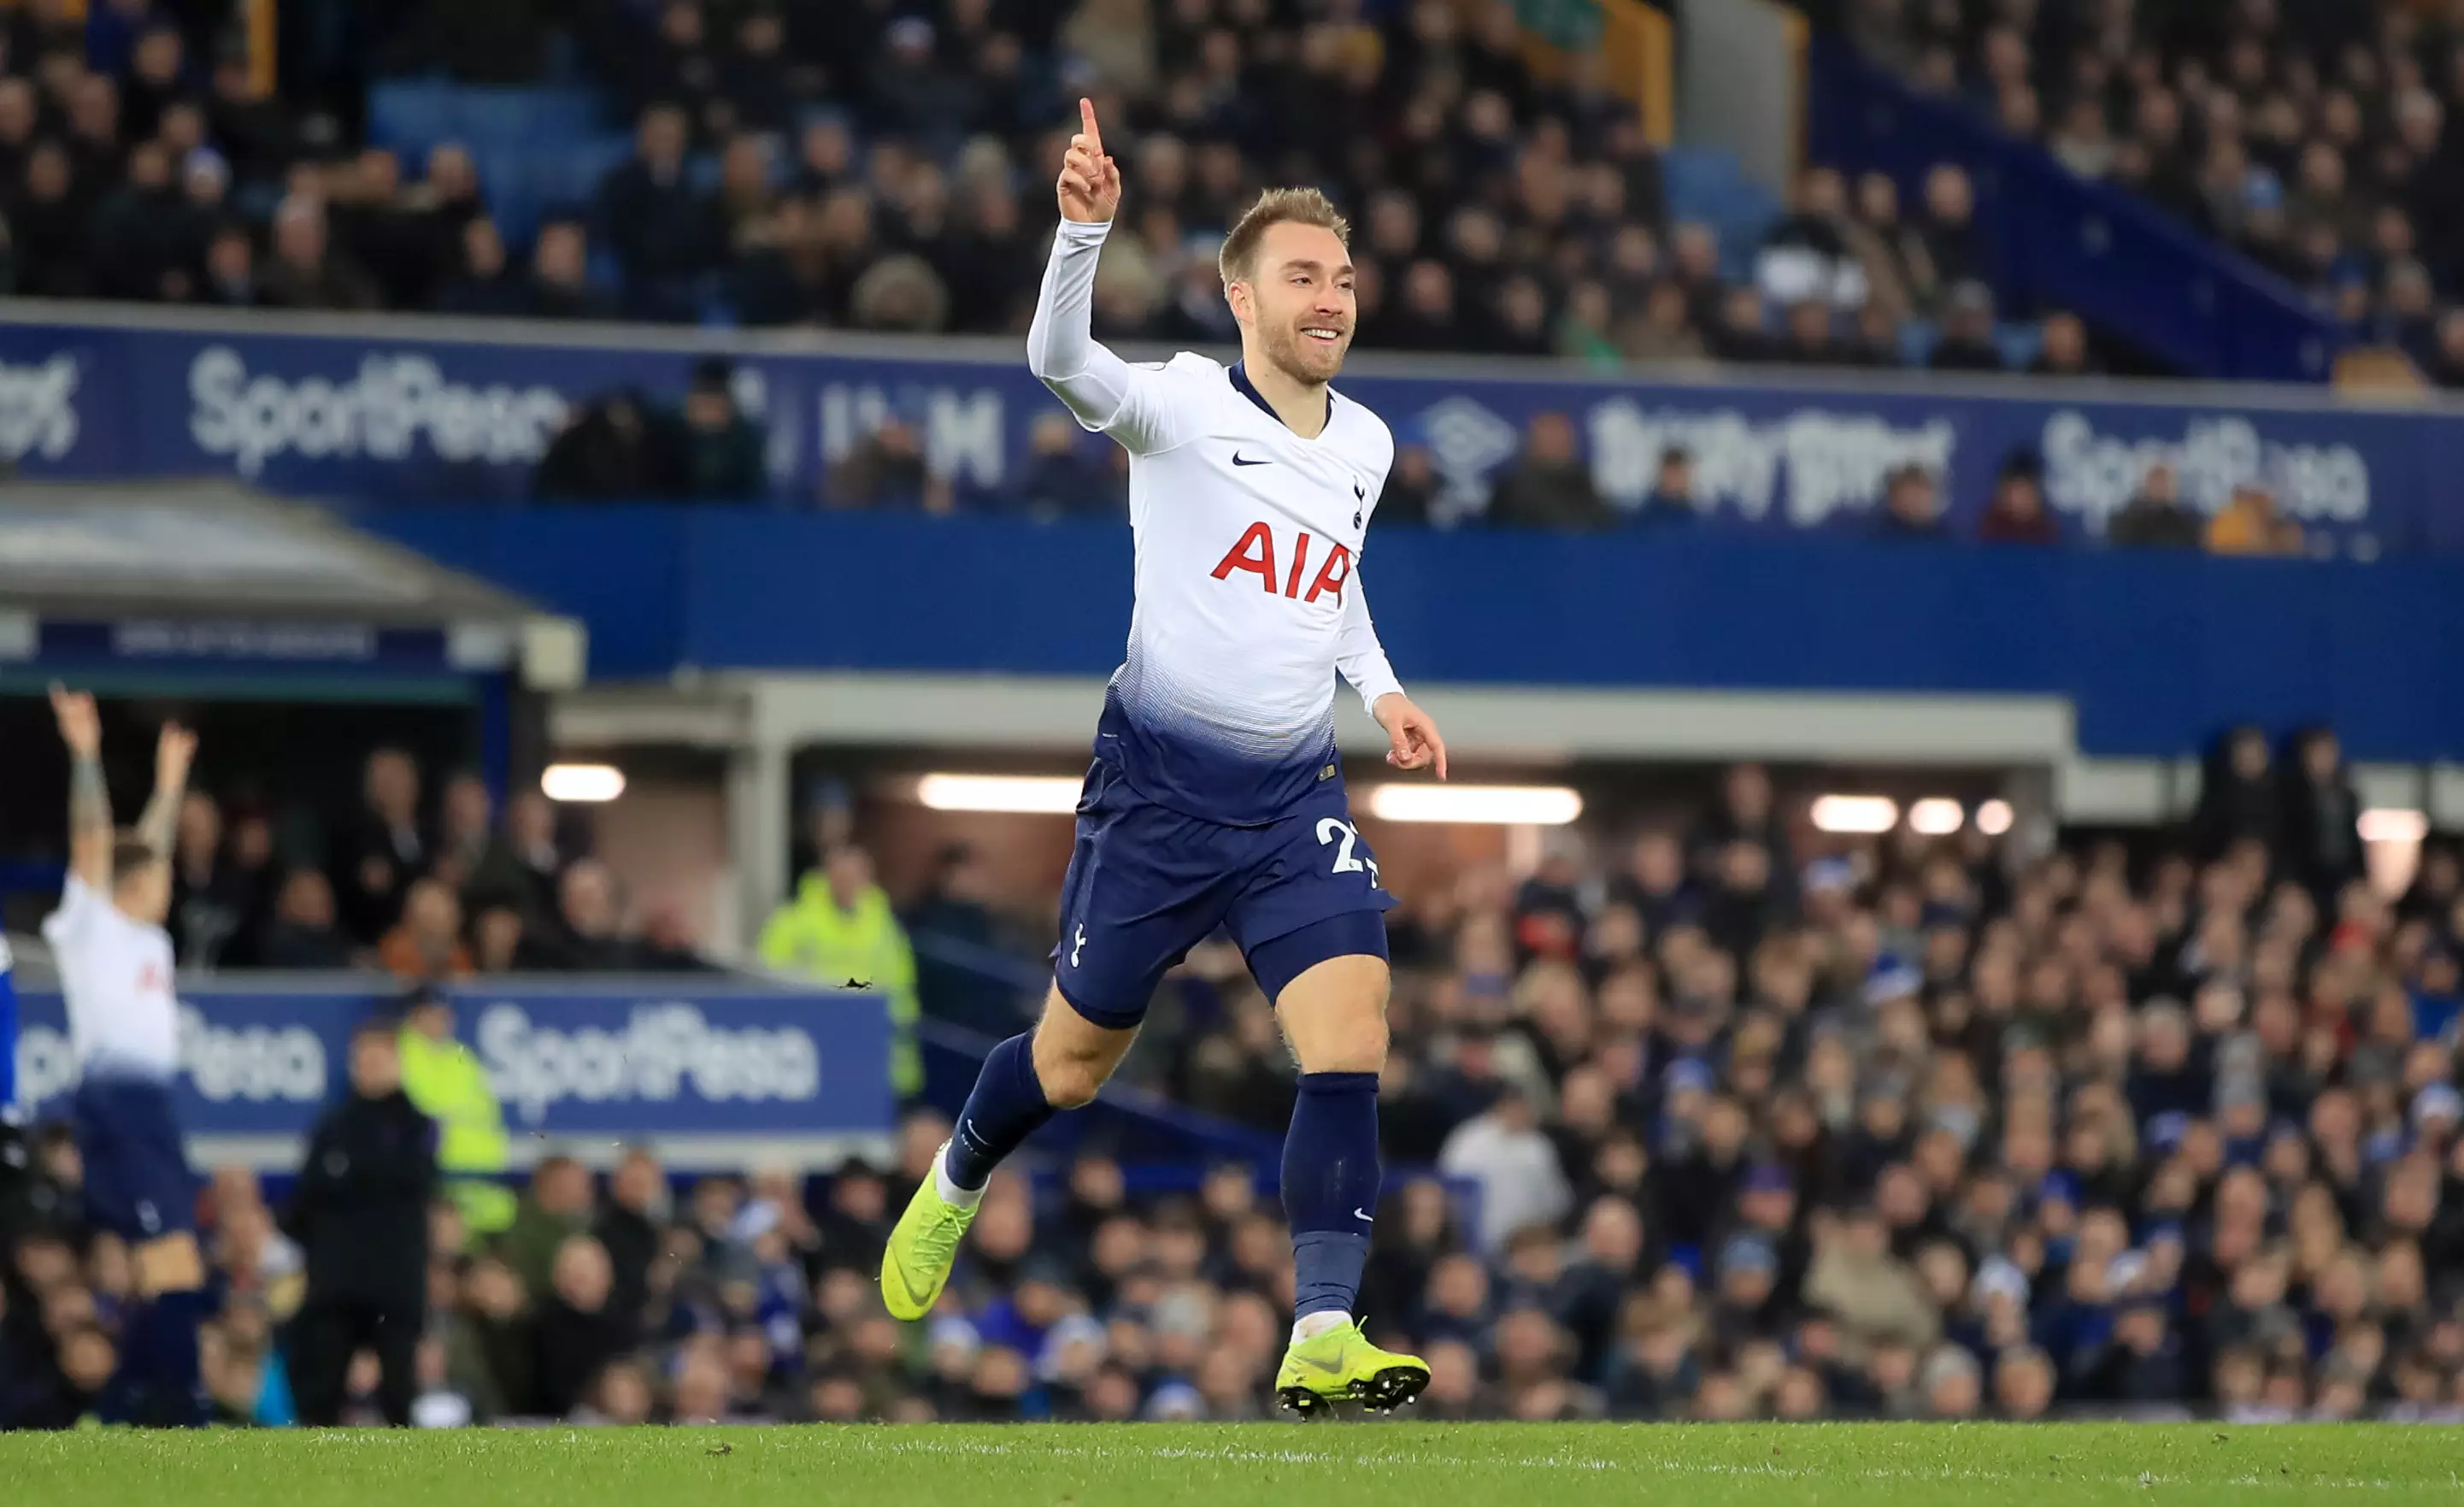 Losing Eriksen would be a huge blow to Spurs. Image: PA Images